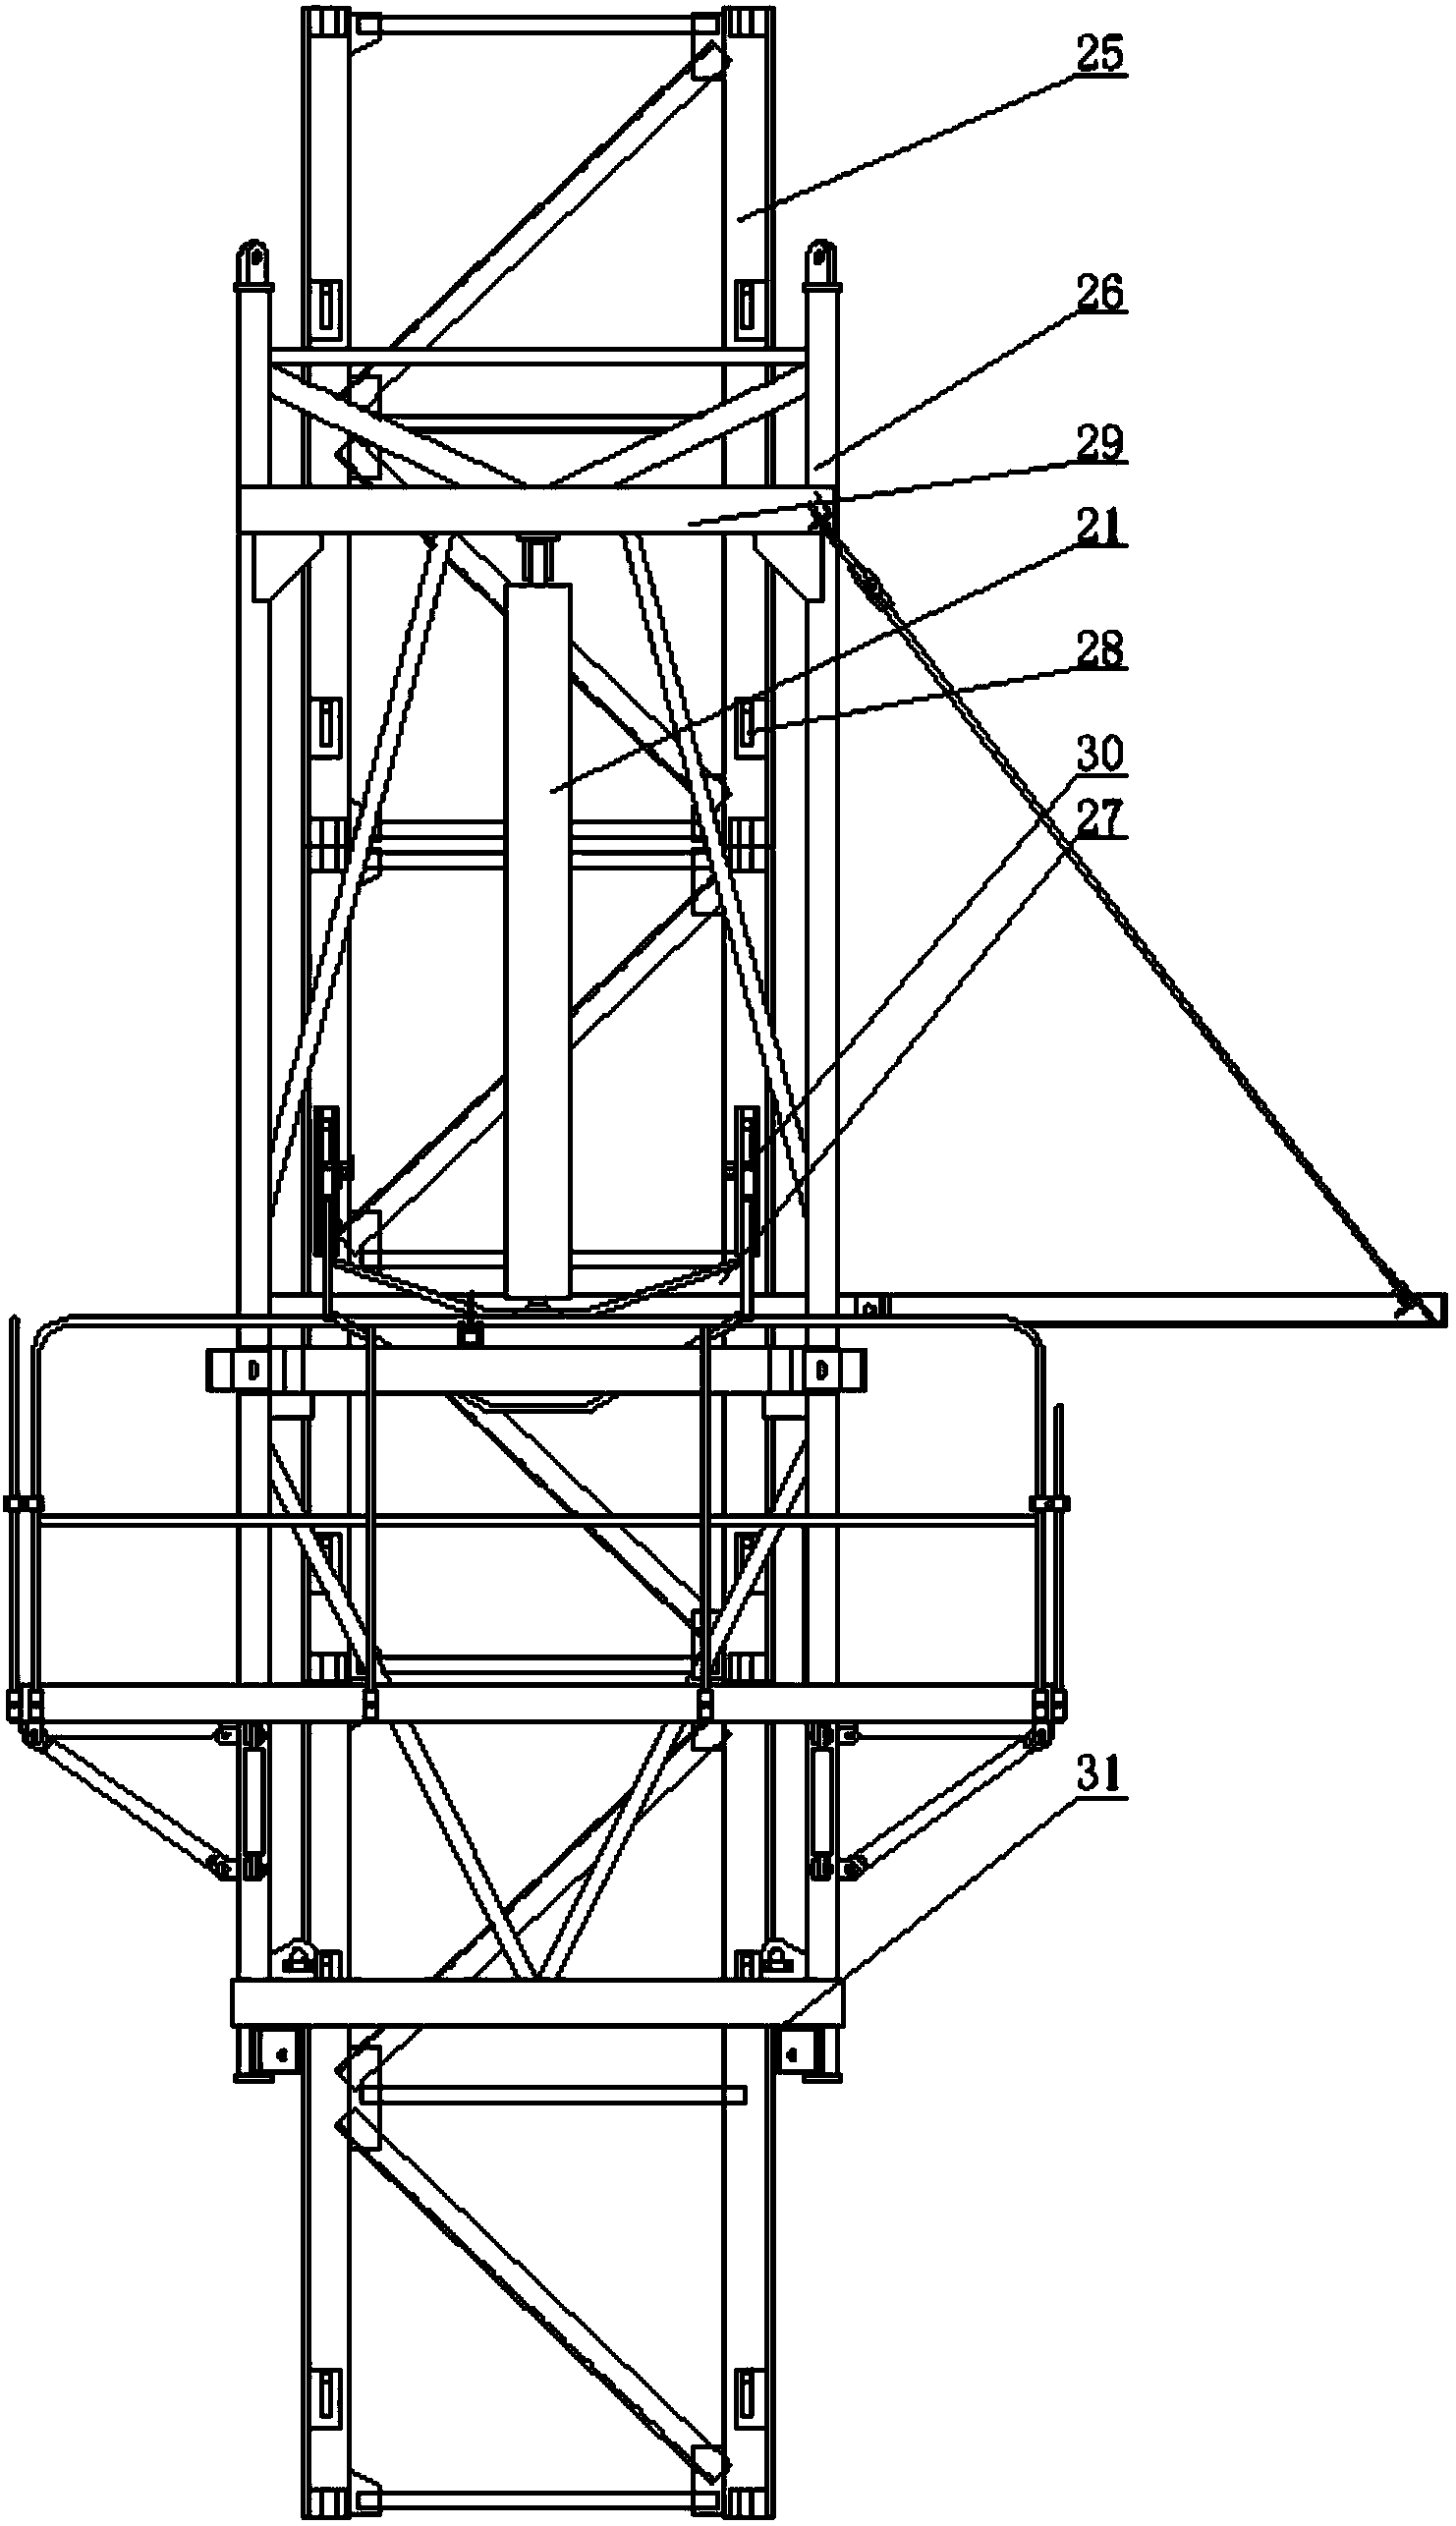 Hydraulic lifting system of attached tower crane